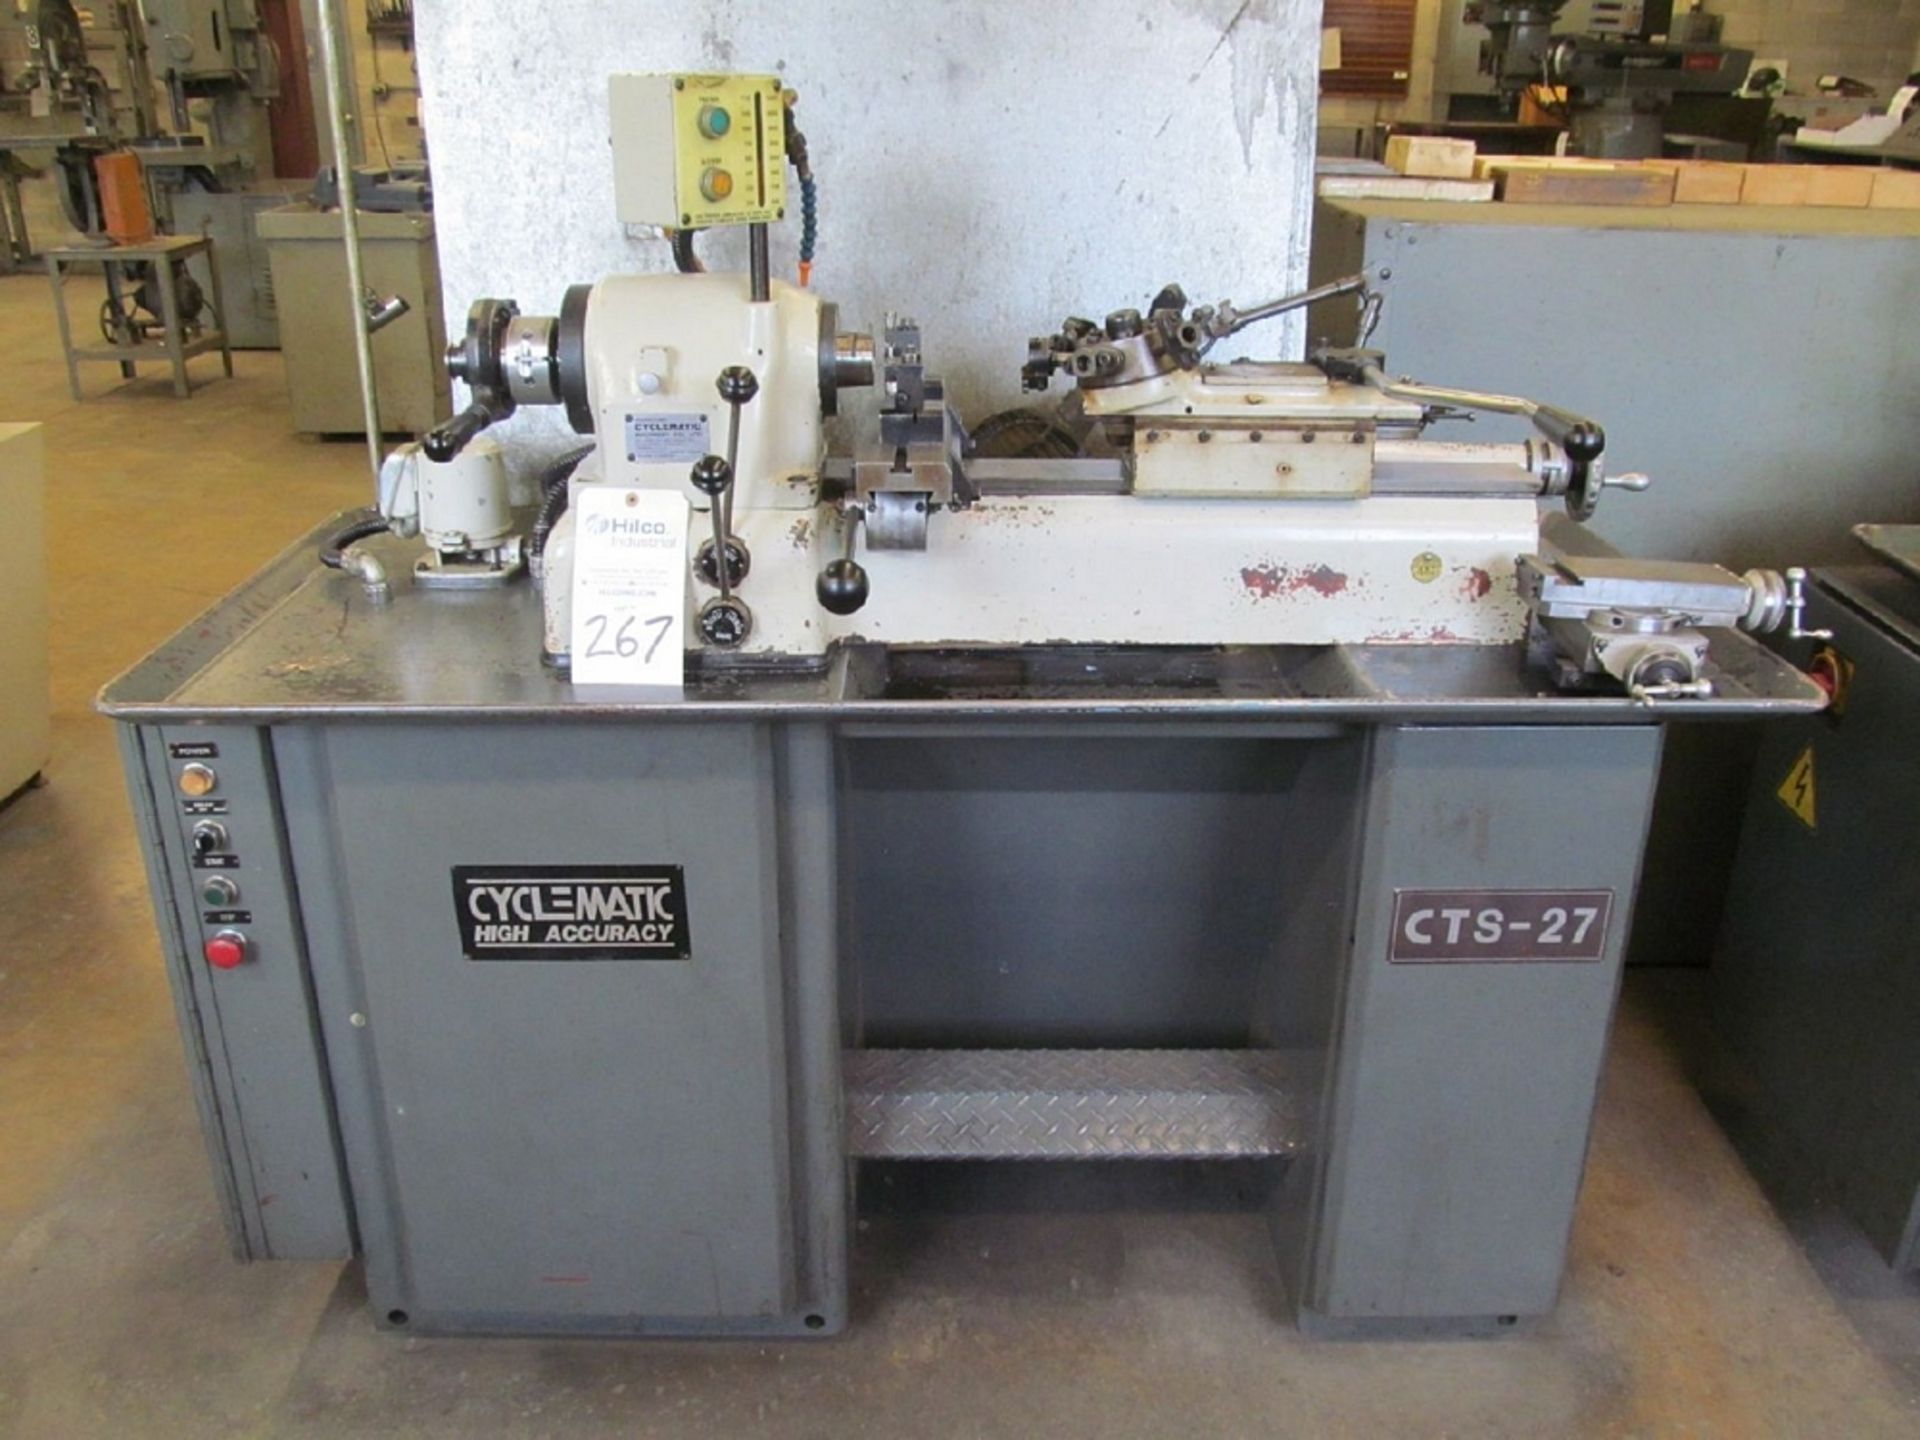 Cyclematic Model CTS-27 9" Tool Room Turret Lathe - Image 2 of 4